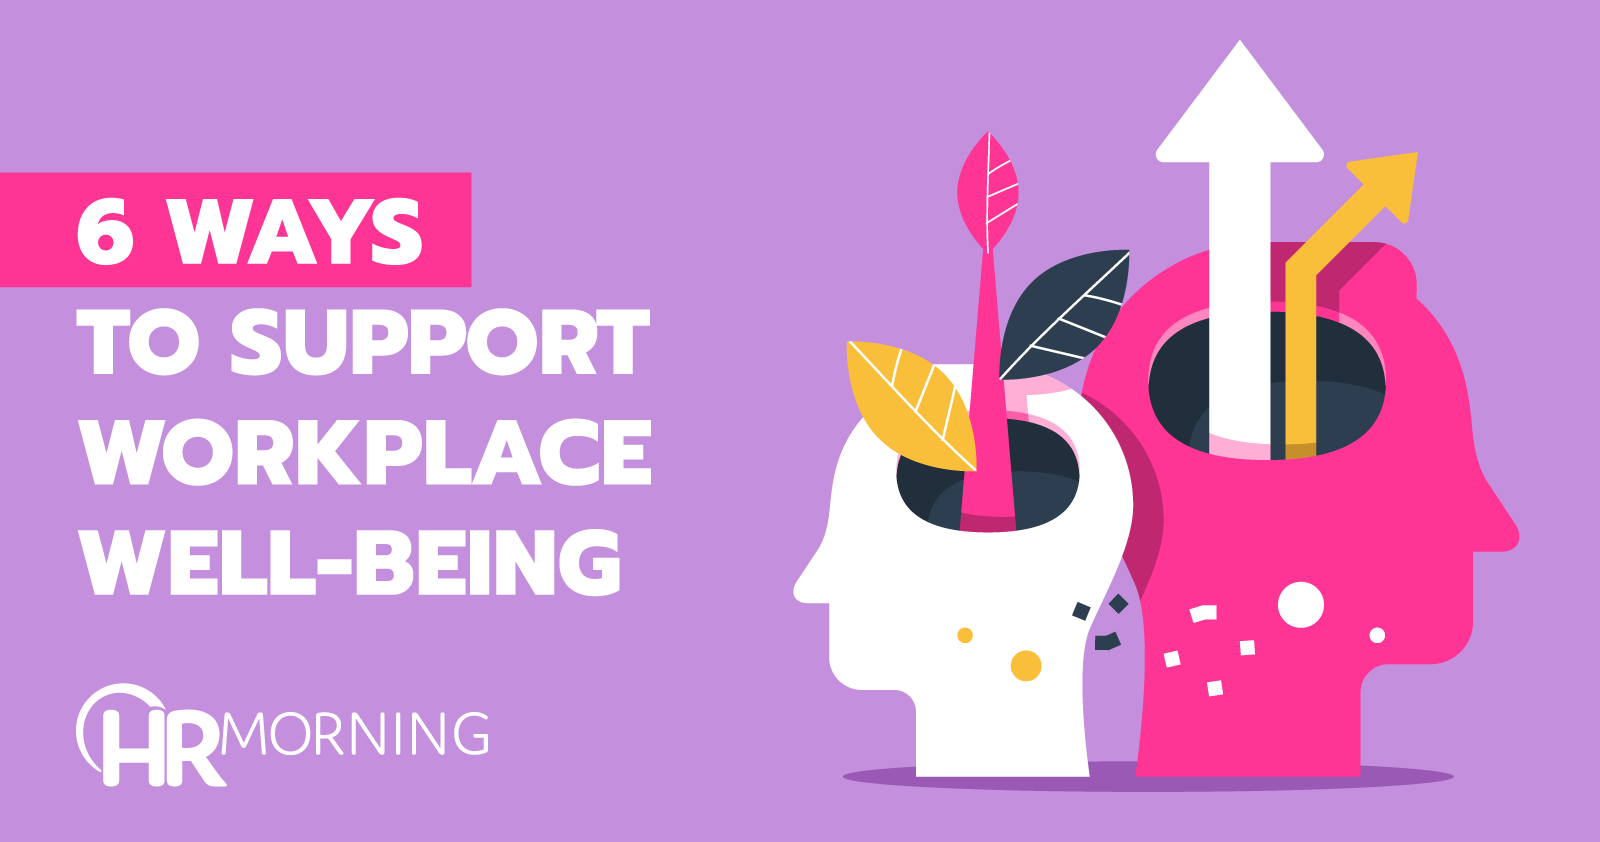 6 ways to support workplace well-being